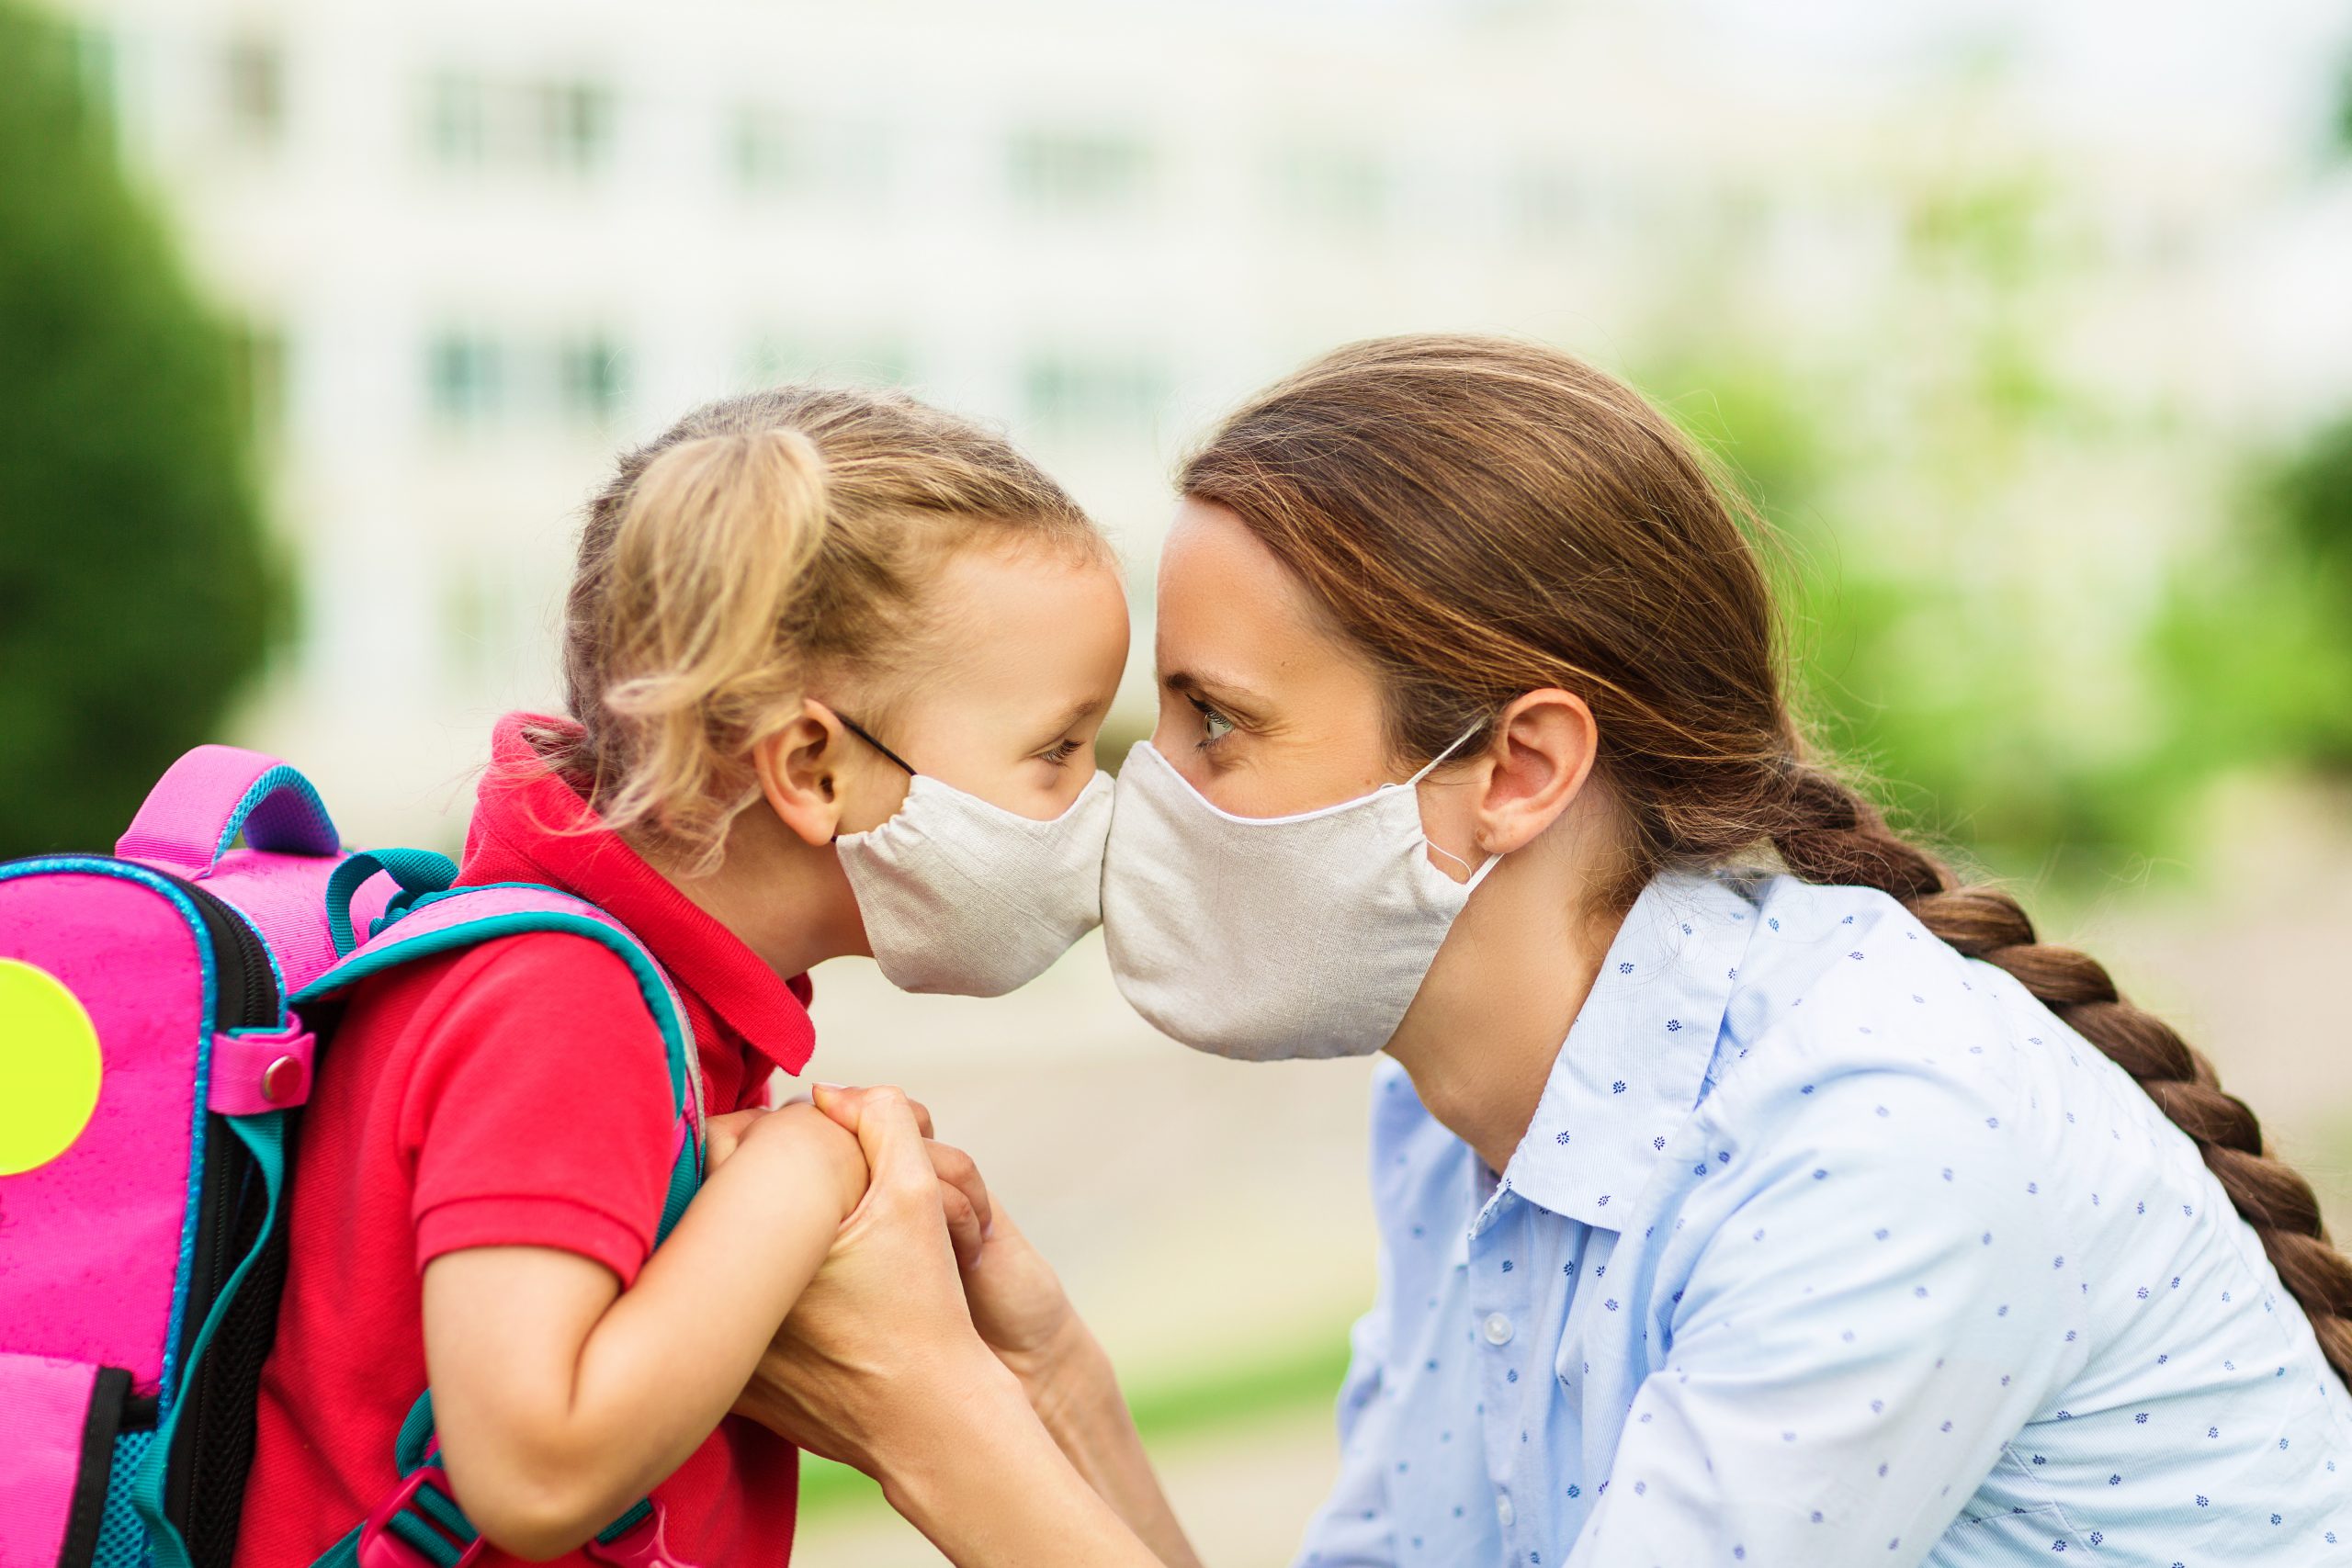 parent and child look into each other's eyes before parting at school and both wear protective medical masks on their faces Close Up